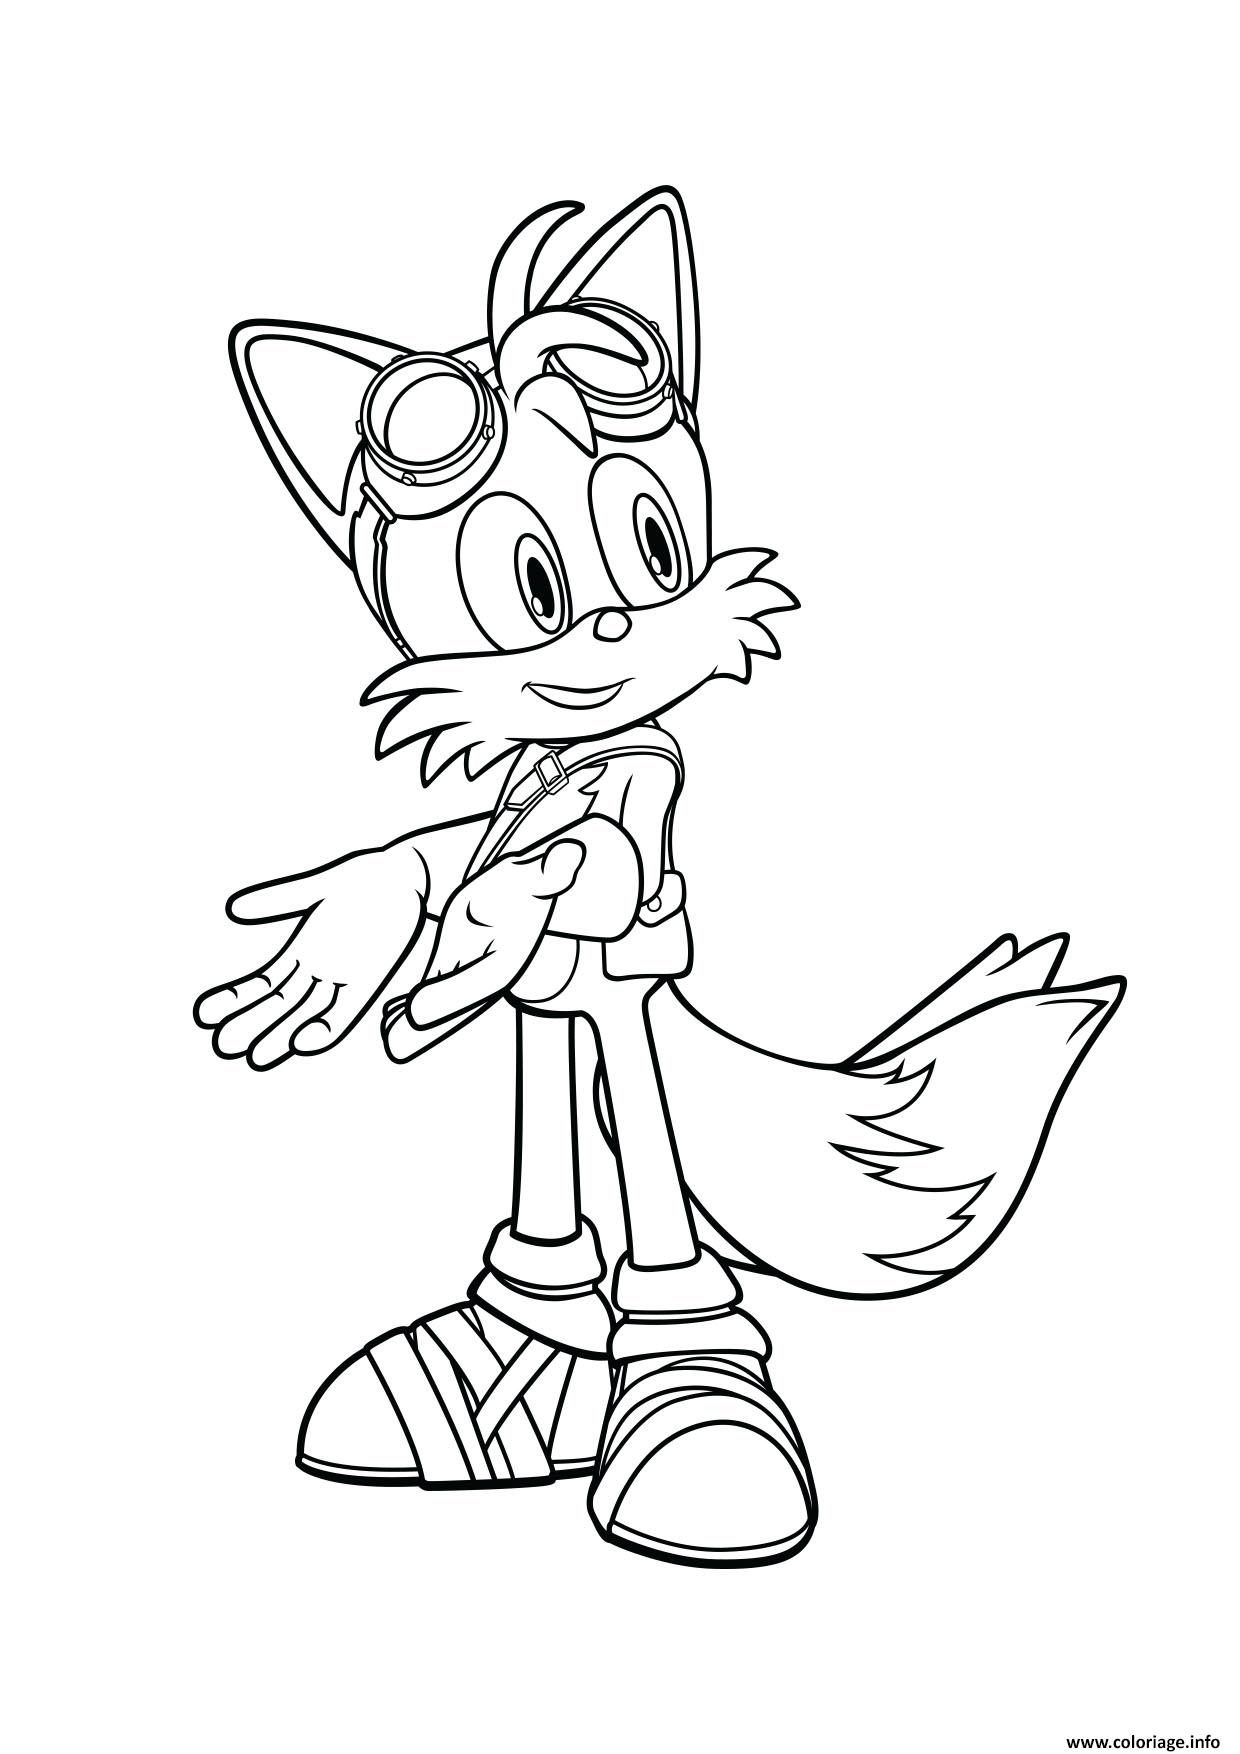 Sonic And Tails Coloring Sheets News Coloring Page Guide Sexiz Pix